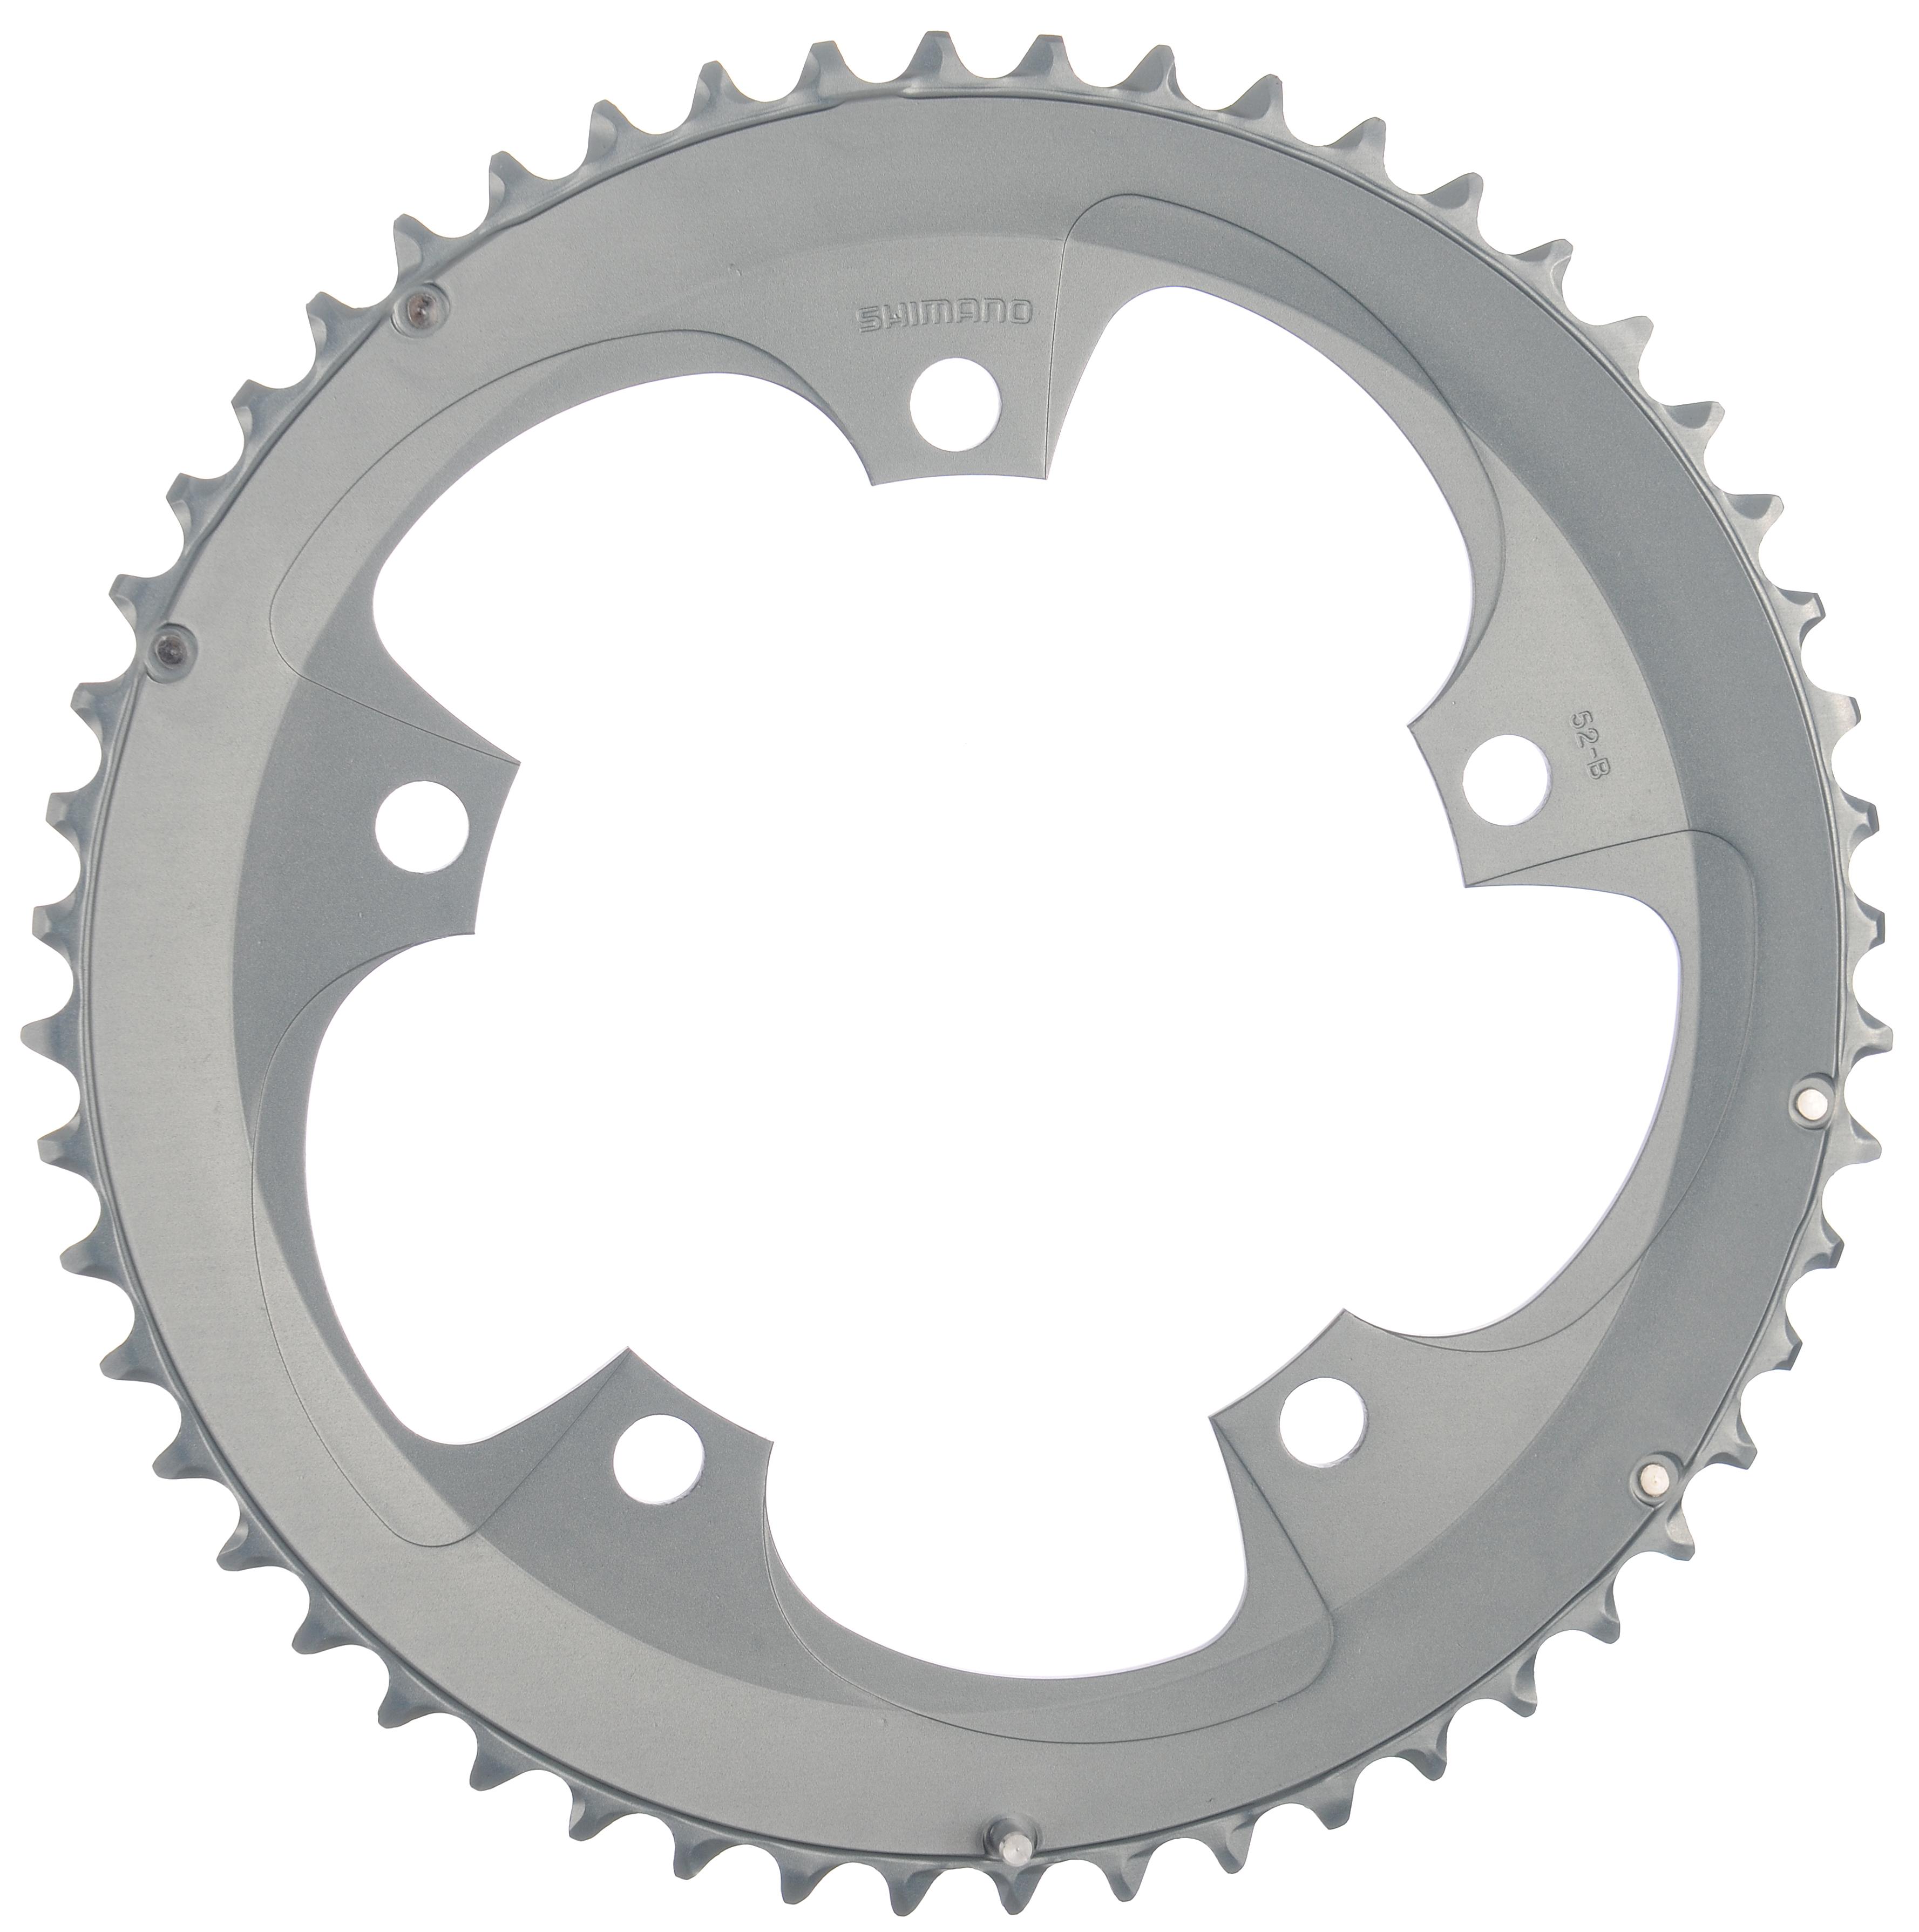 Shimano Tiagra Fc4600 10sp Double Chainrings - Silver